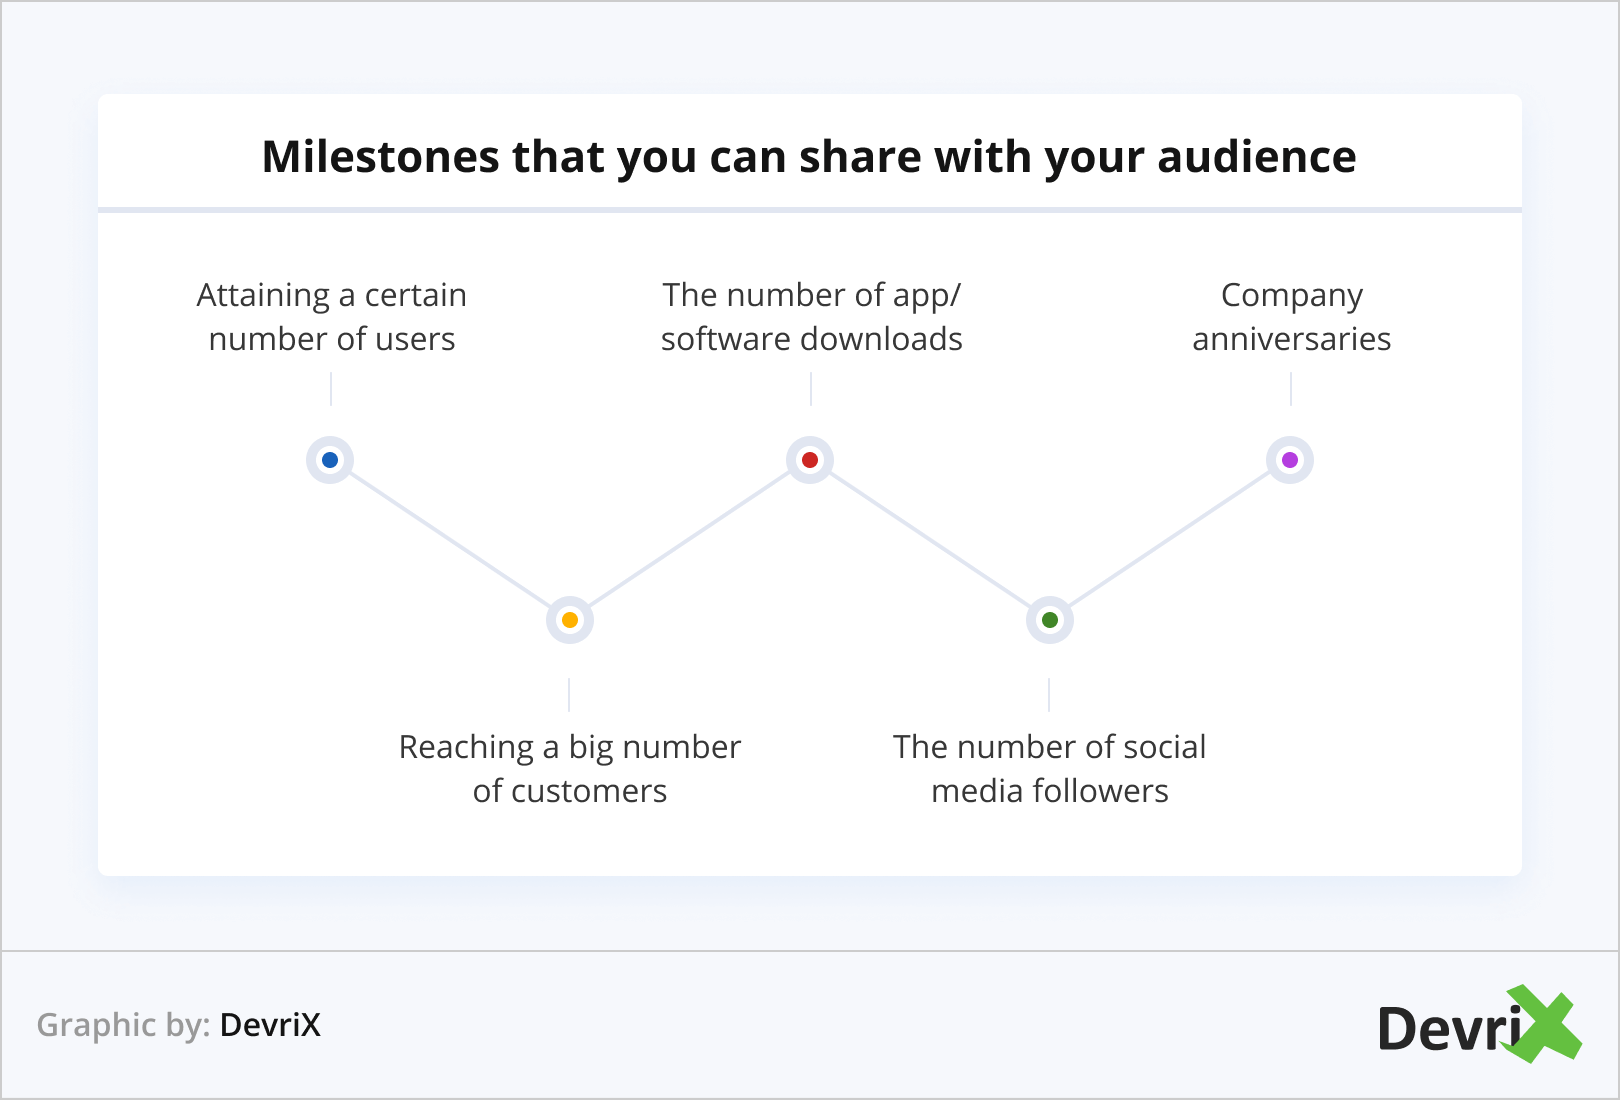 Milestones that you can share with your audience